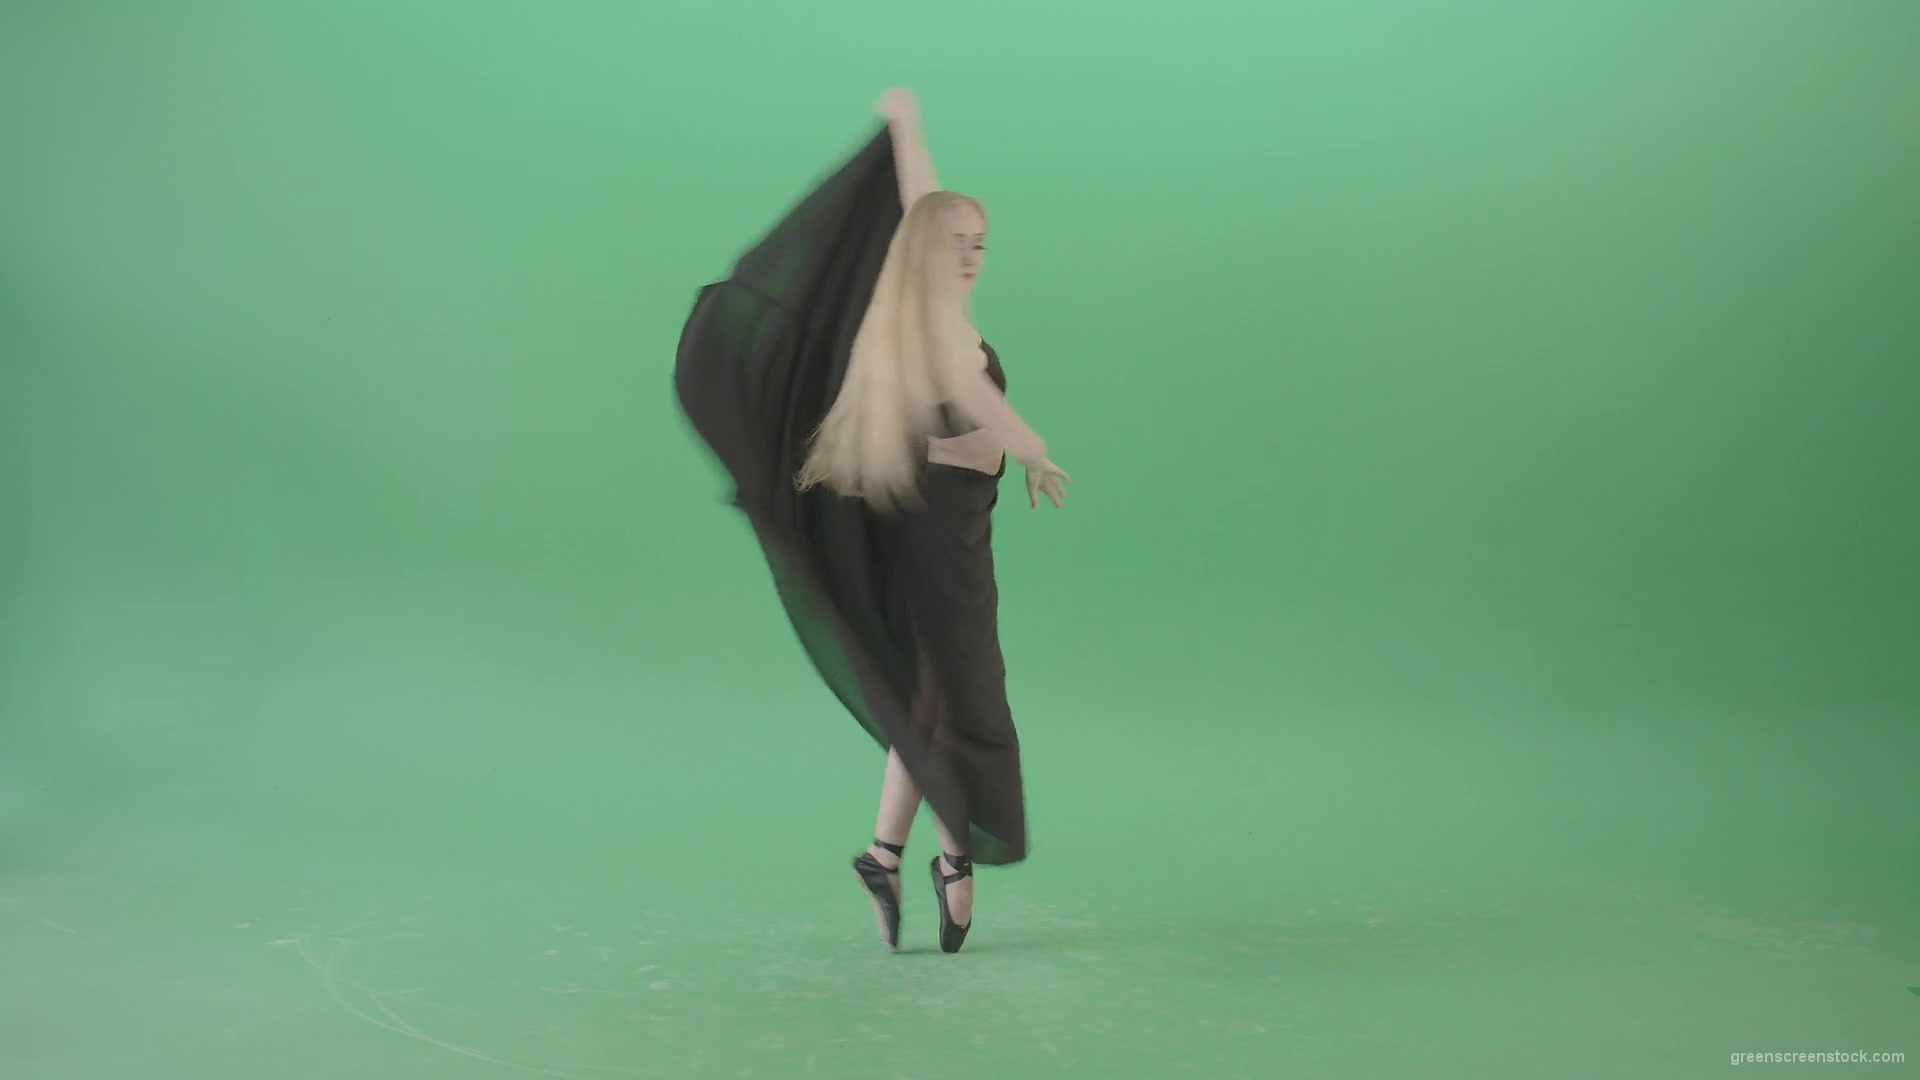 Spinning-isolated-on-green-screen-ballet-young-woman-ballerin-in-black-costume-4K-Video-Footage-1920_008 Green Screen Stock